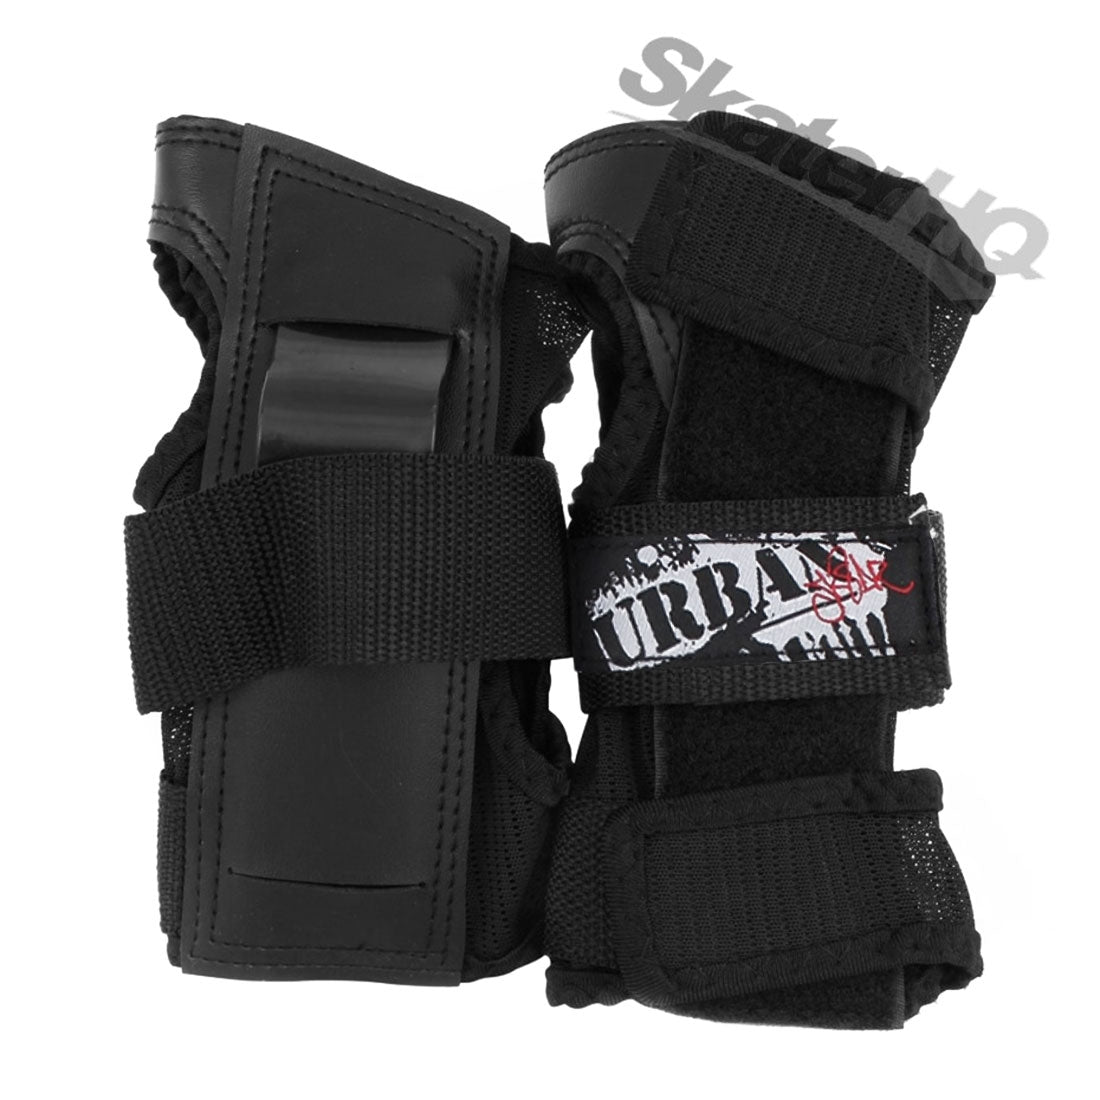 Urban Skater Wrist Guards - Large Protective Gear